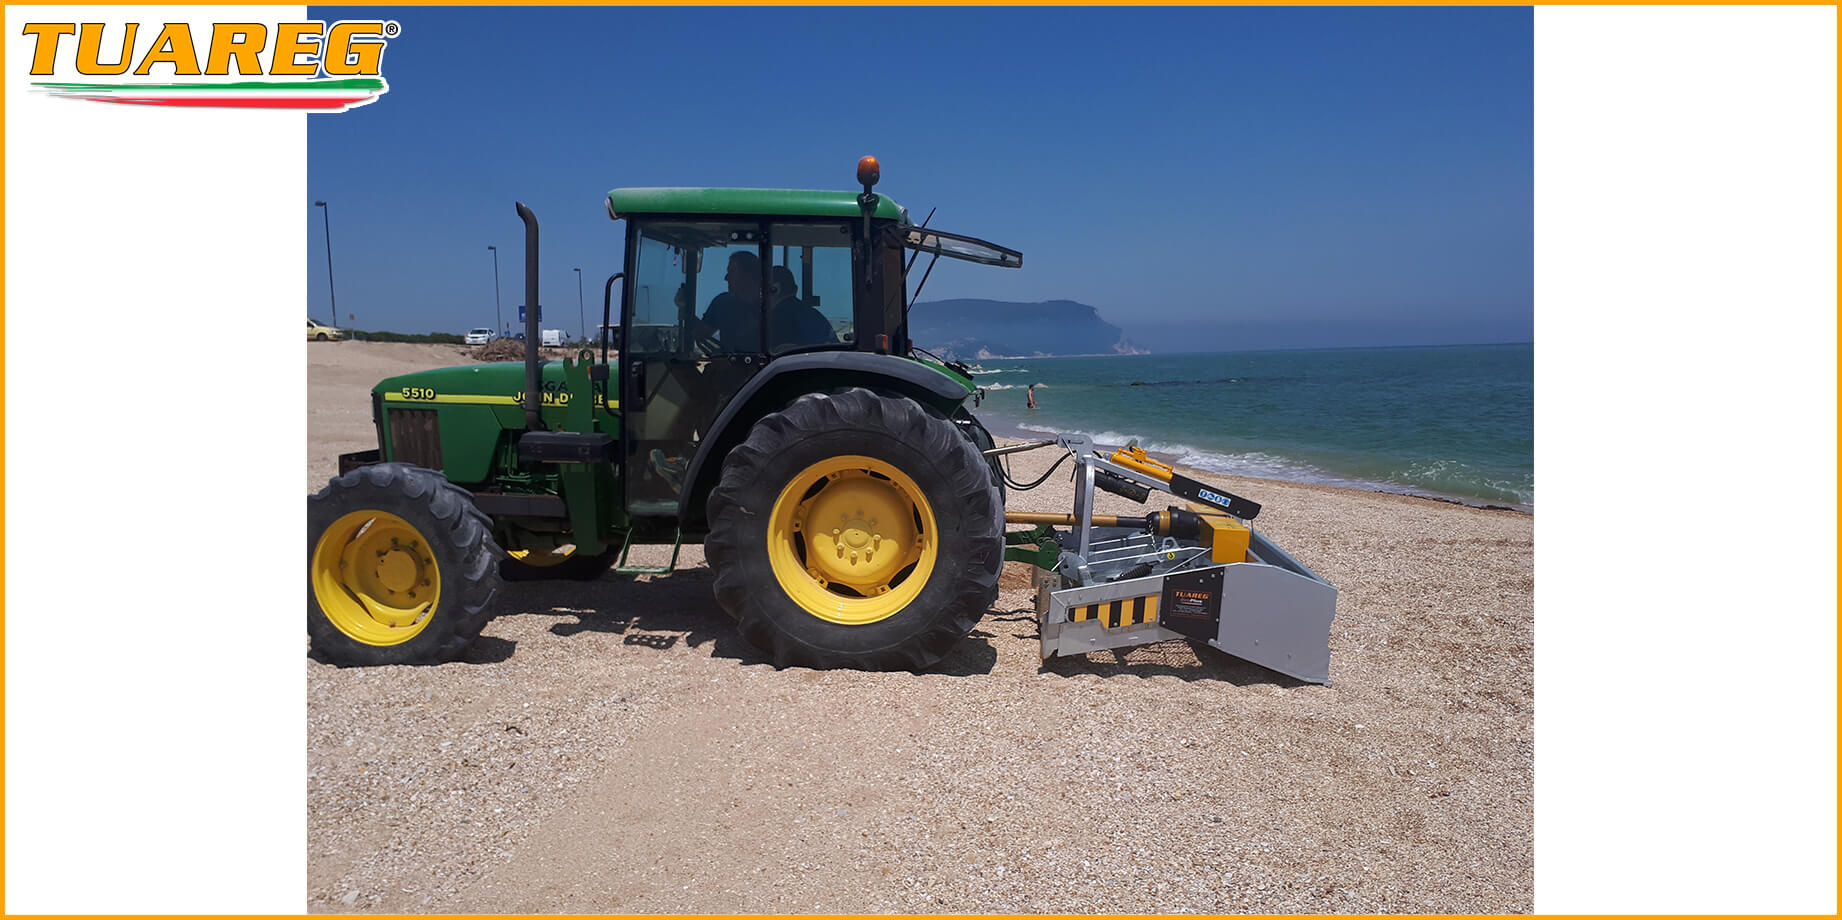 Tuareg EvoPlus - Beach Cleaning Machine - Attached to a Tractor